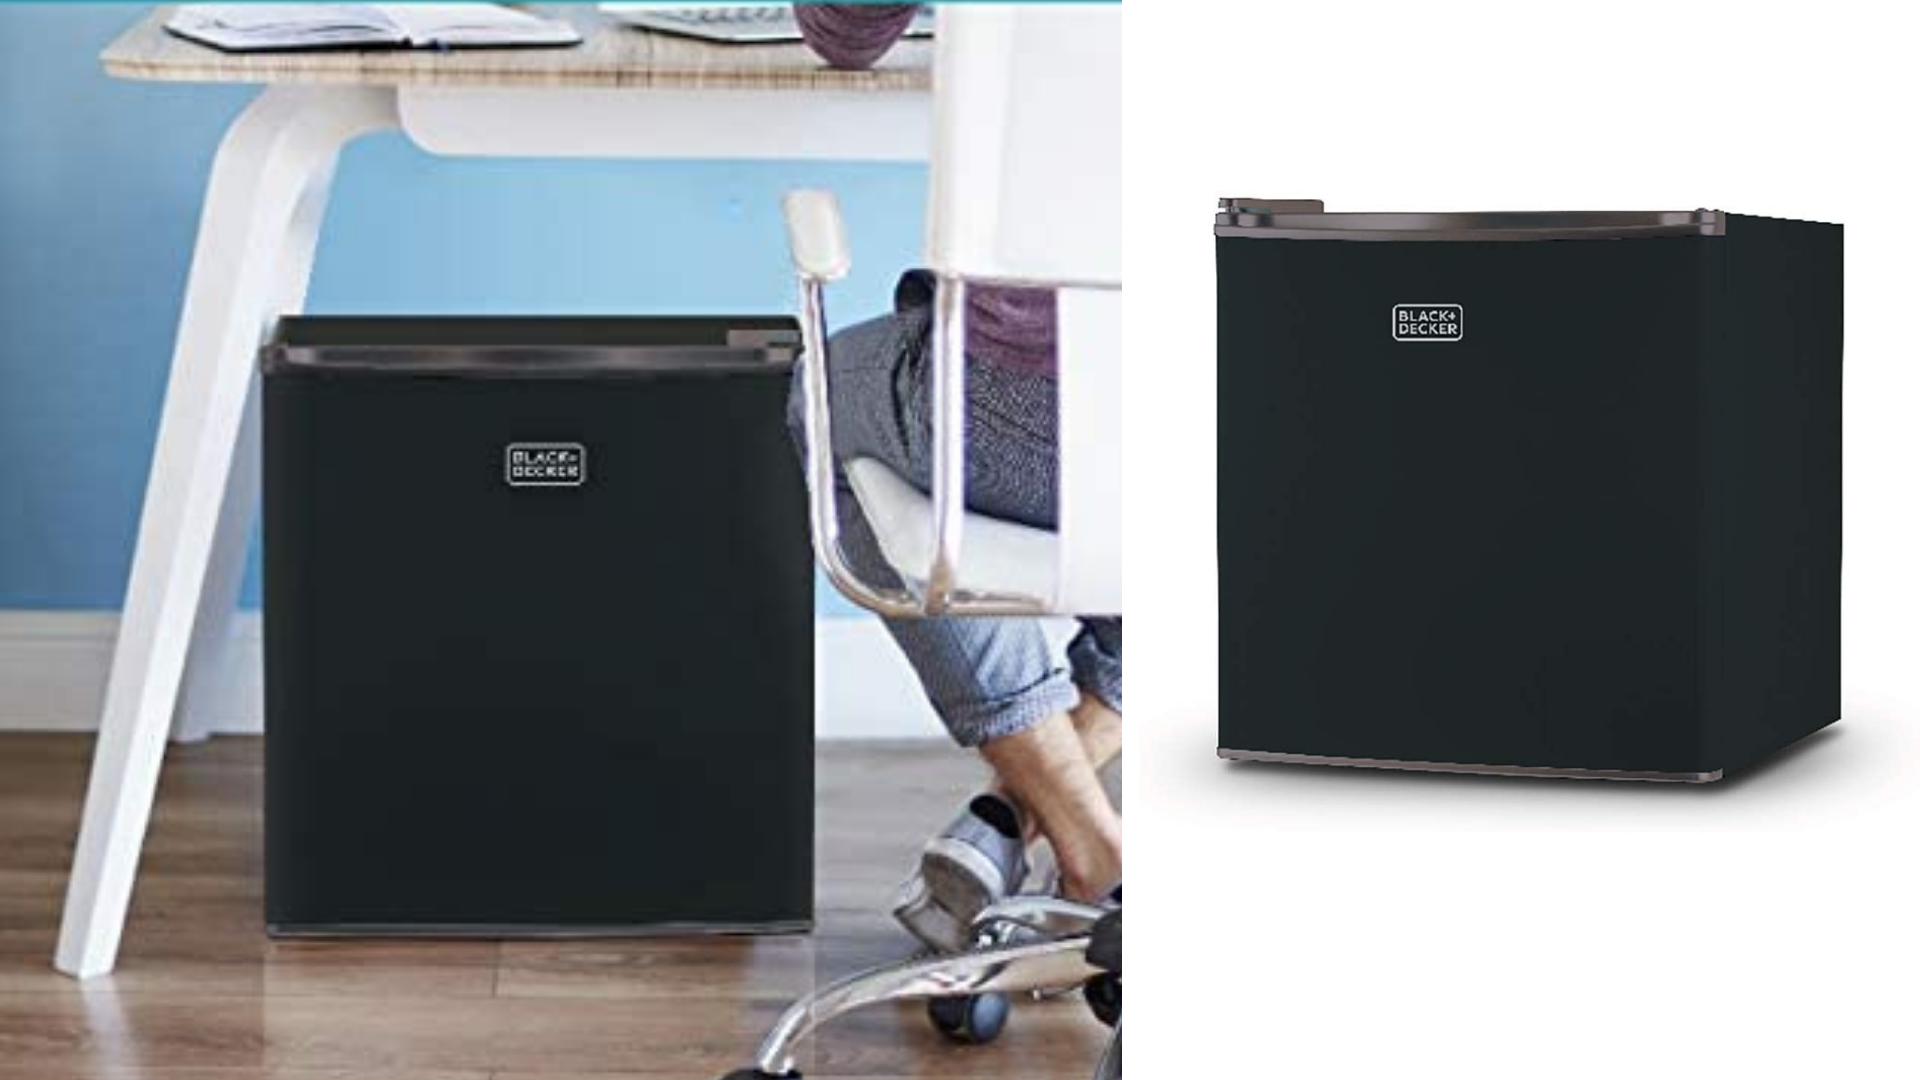 If you are cramped for space in your dorm room, then buy a mini fridge that really shrinks.